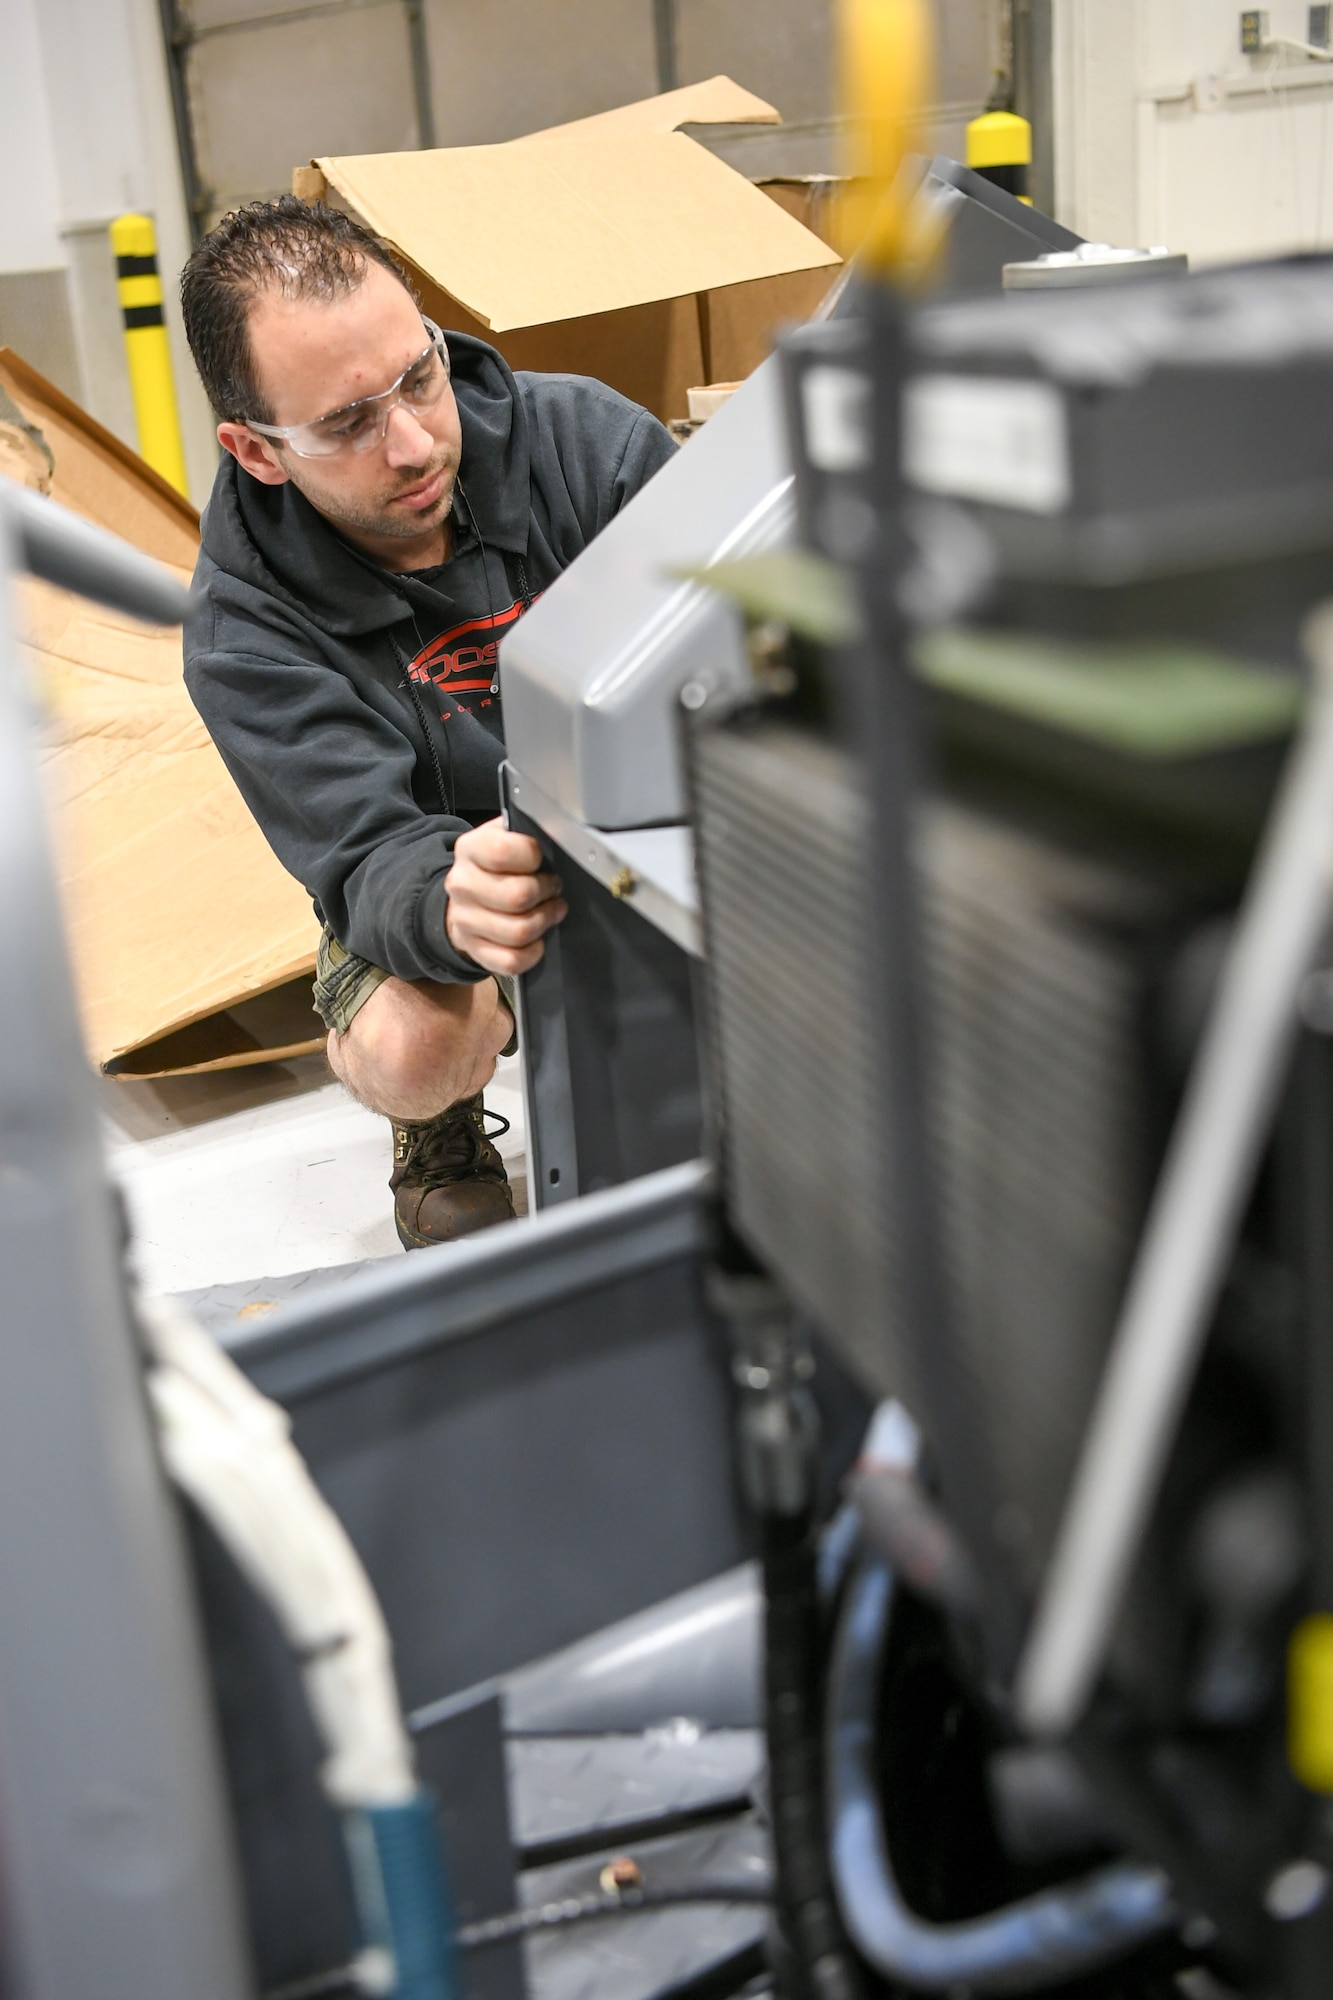 Kevin Watkins, 309th Electronics Maintenance Group, replaces a panel on a MJ-1 jammer April 29, 2020, at Hill Air Force Base, Utah. The 309th EMXG in the Ogden Air Logistics Complex provides repair and overhaul for exchangeable assets for a multitude of systems on a wide assortment of Air Force weapons systems including fighter aircraft, intercontinental ballistic missiles, powered aerospace ground equipment, tactical shelters, as well as refurbishment of radomes worldwide. (U.S. Air Force photo by Cynthia Griggs)